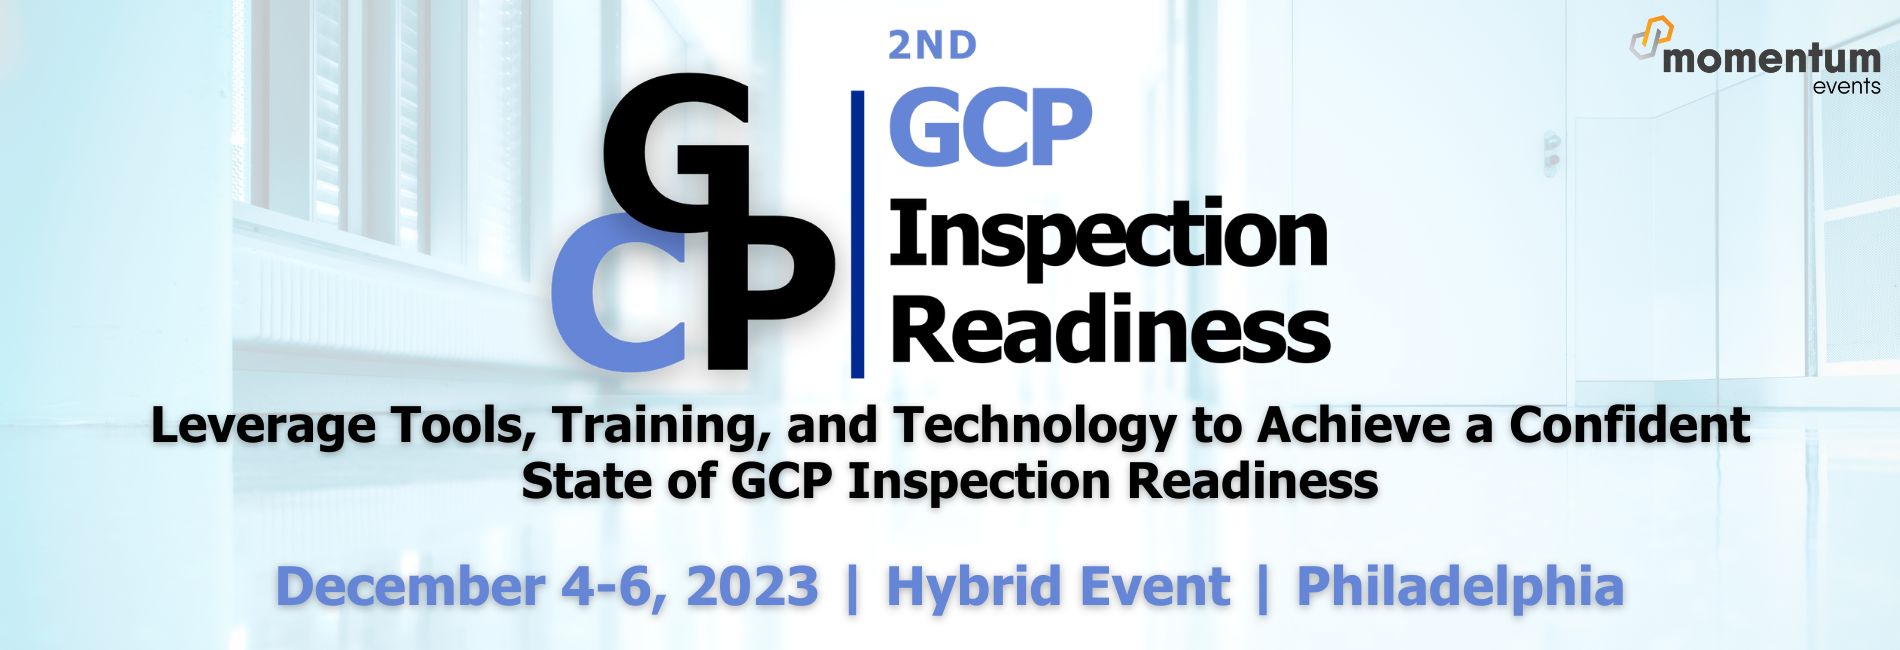 2nd GCP Inspection Readiness, Online Event